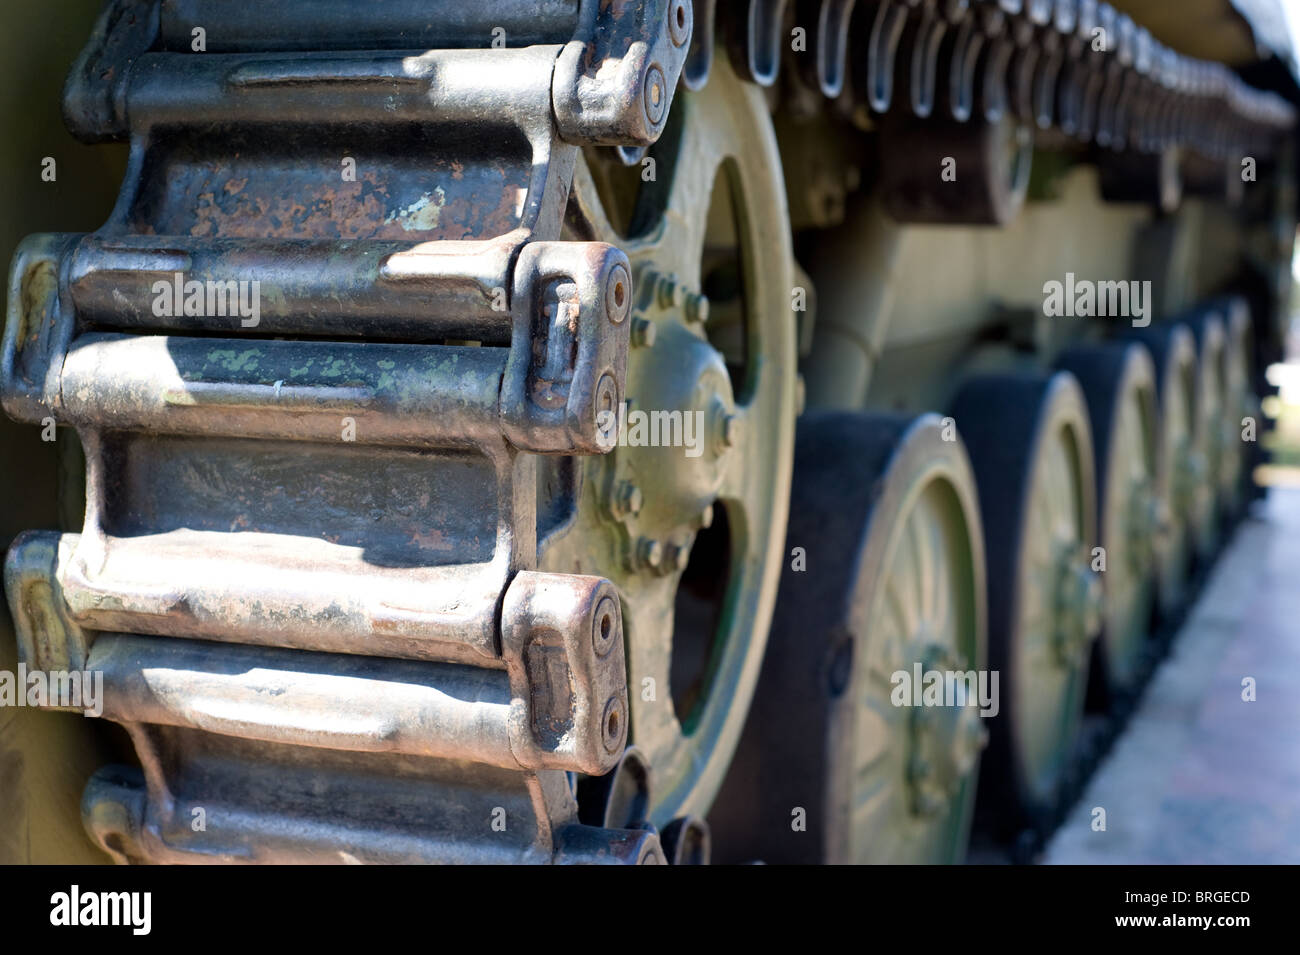 caterpillar of Russian infantry fighting vehicle, closeup shot, wheels in perspective Stock Photo